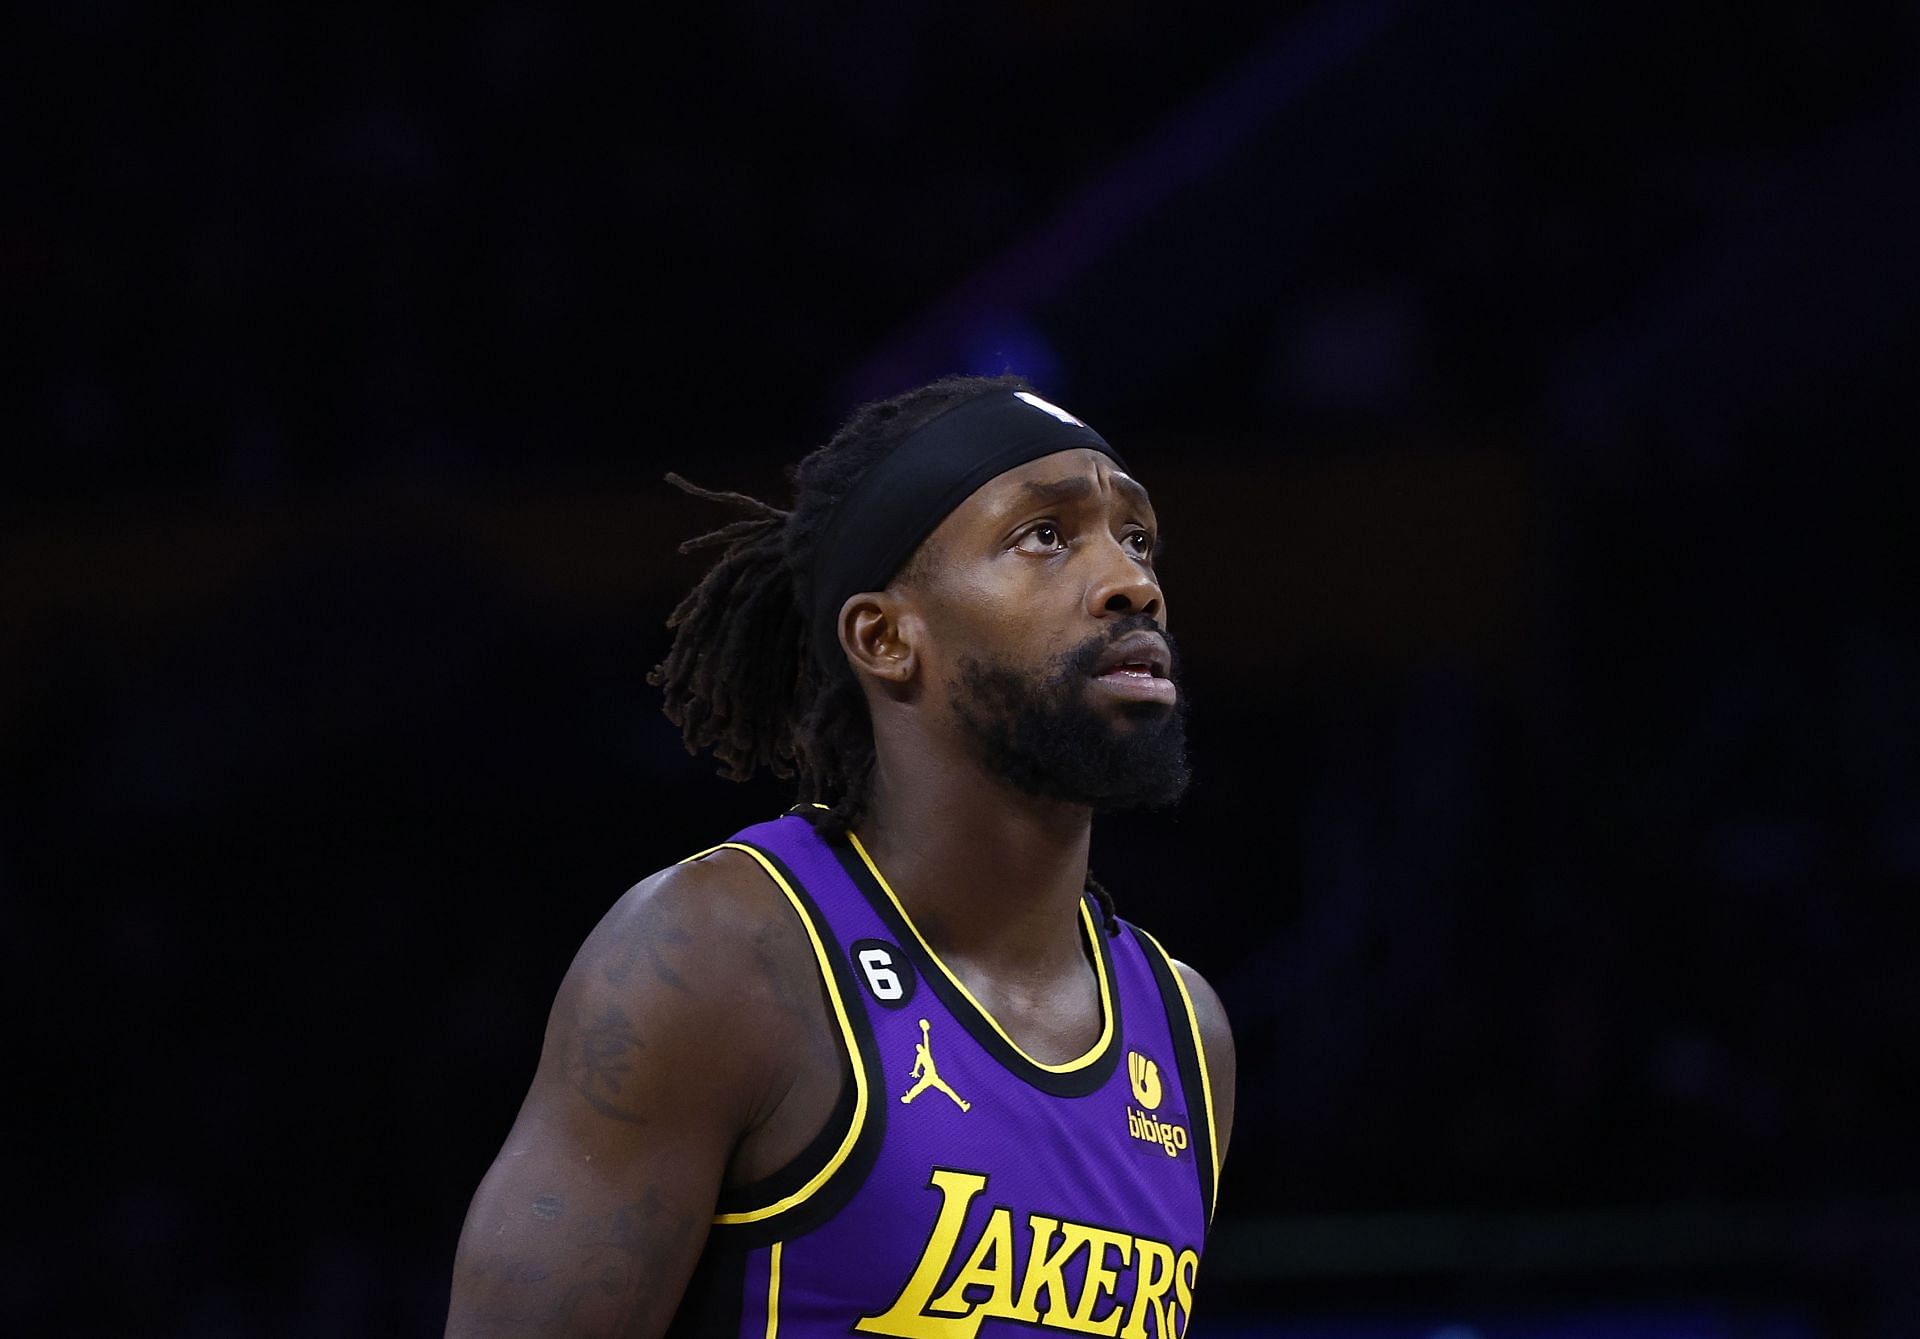 WATCH: First look at Patrick Beverley in his Lakers jersey will